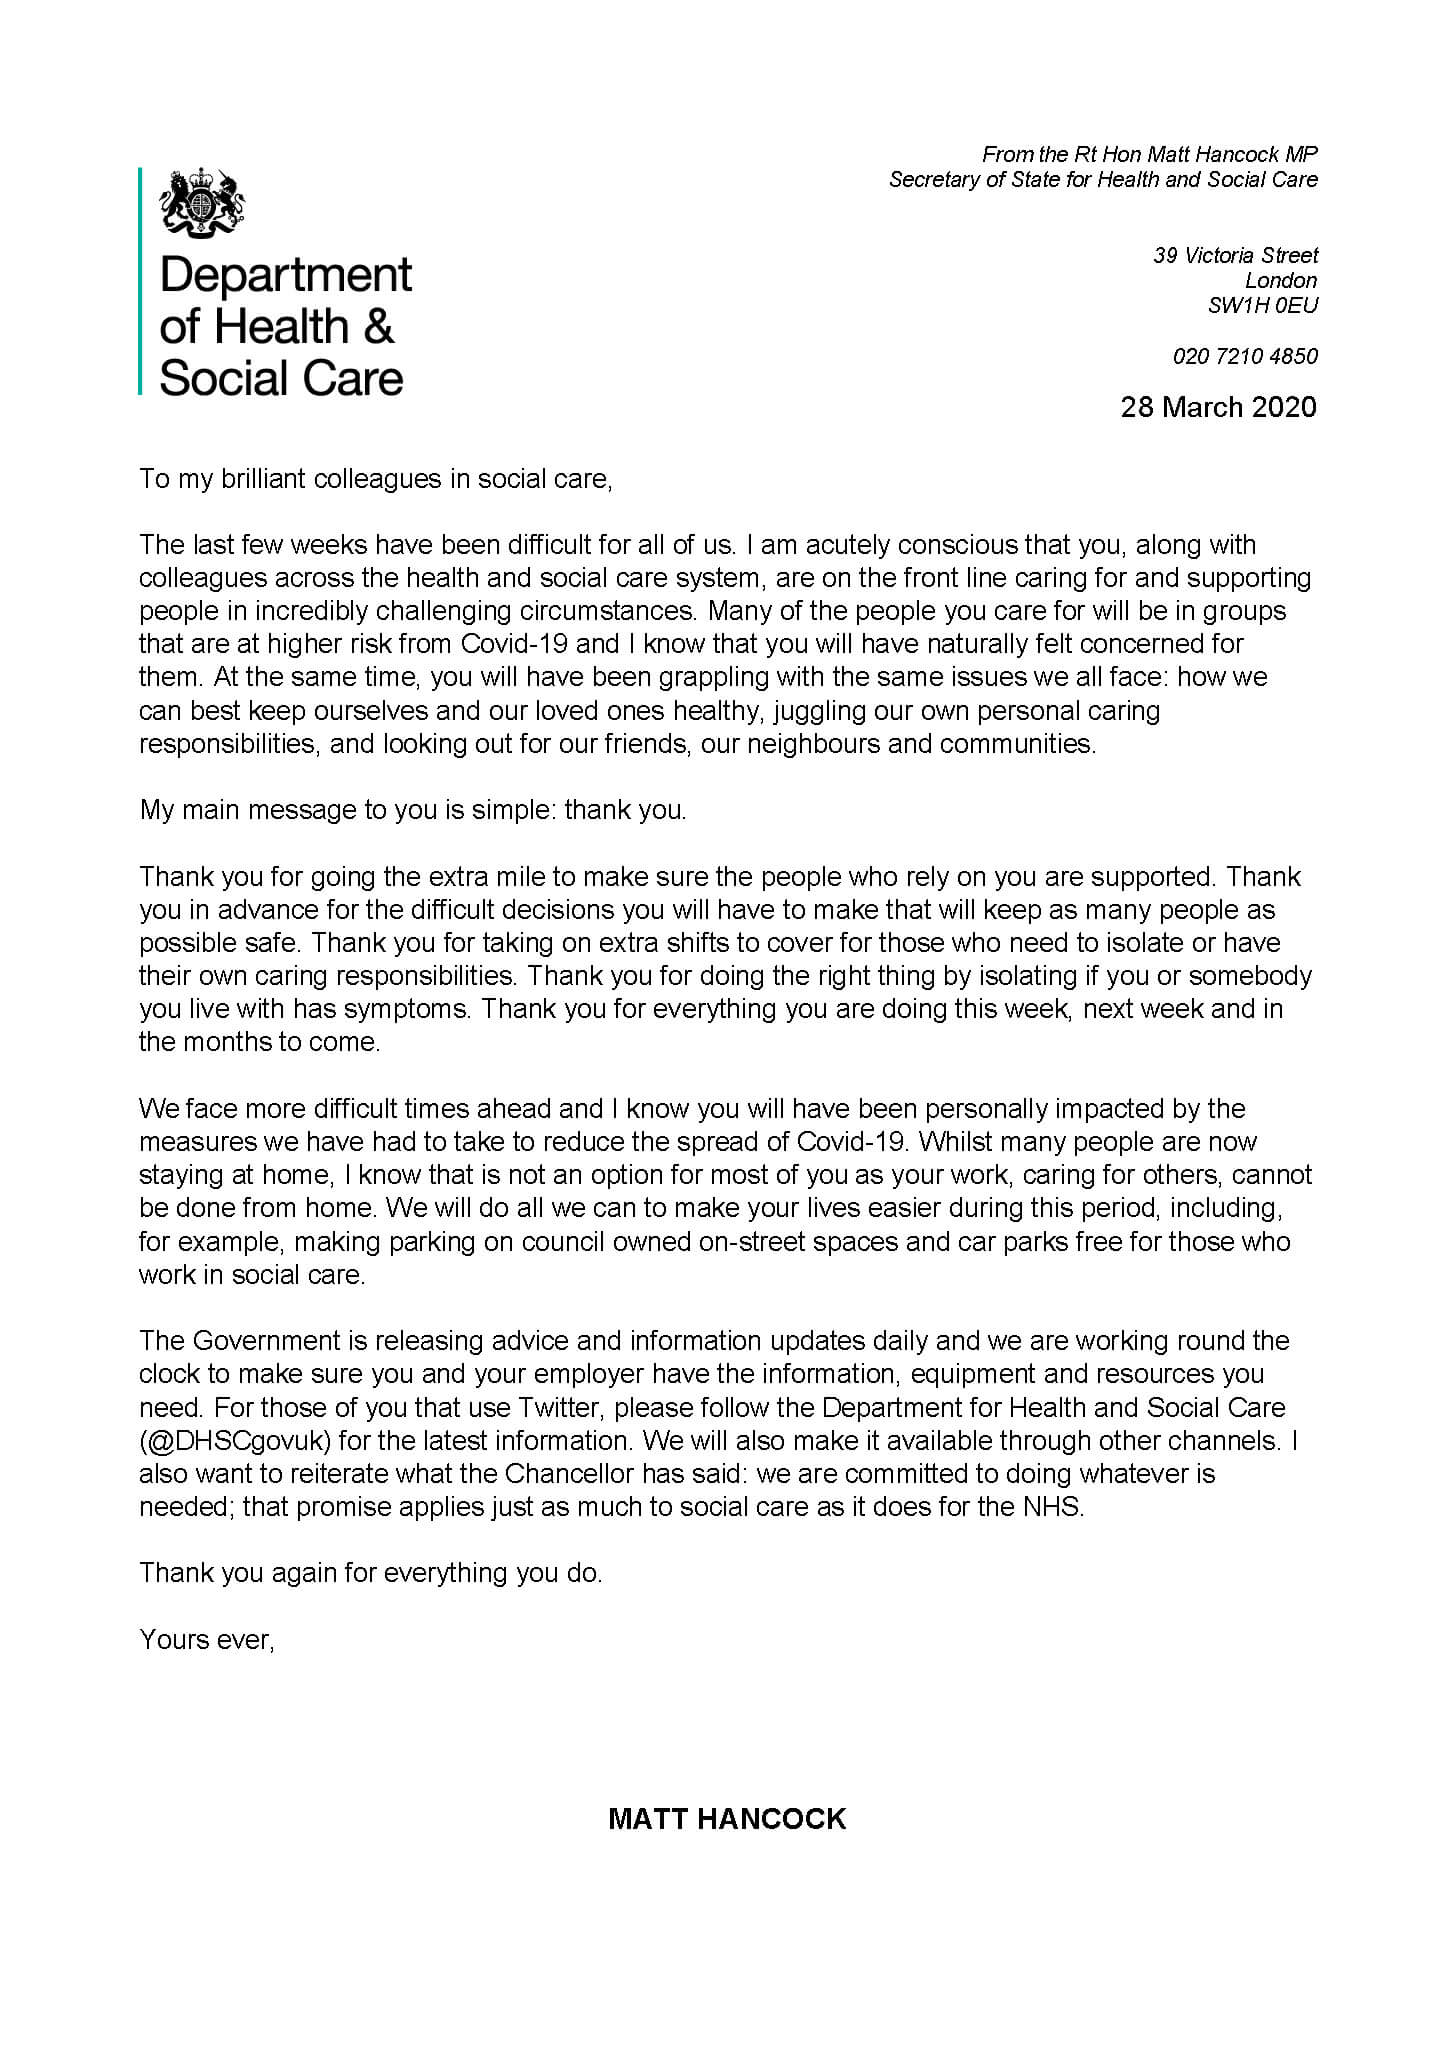 A message from the Health and Social Care Secretary